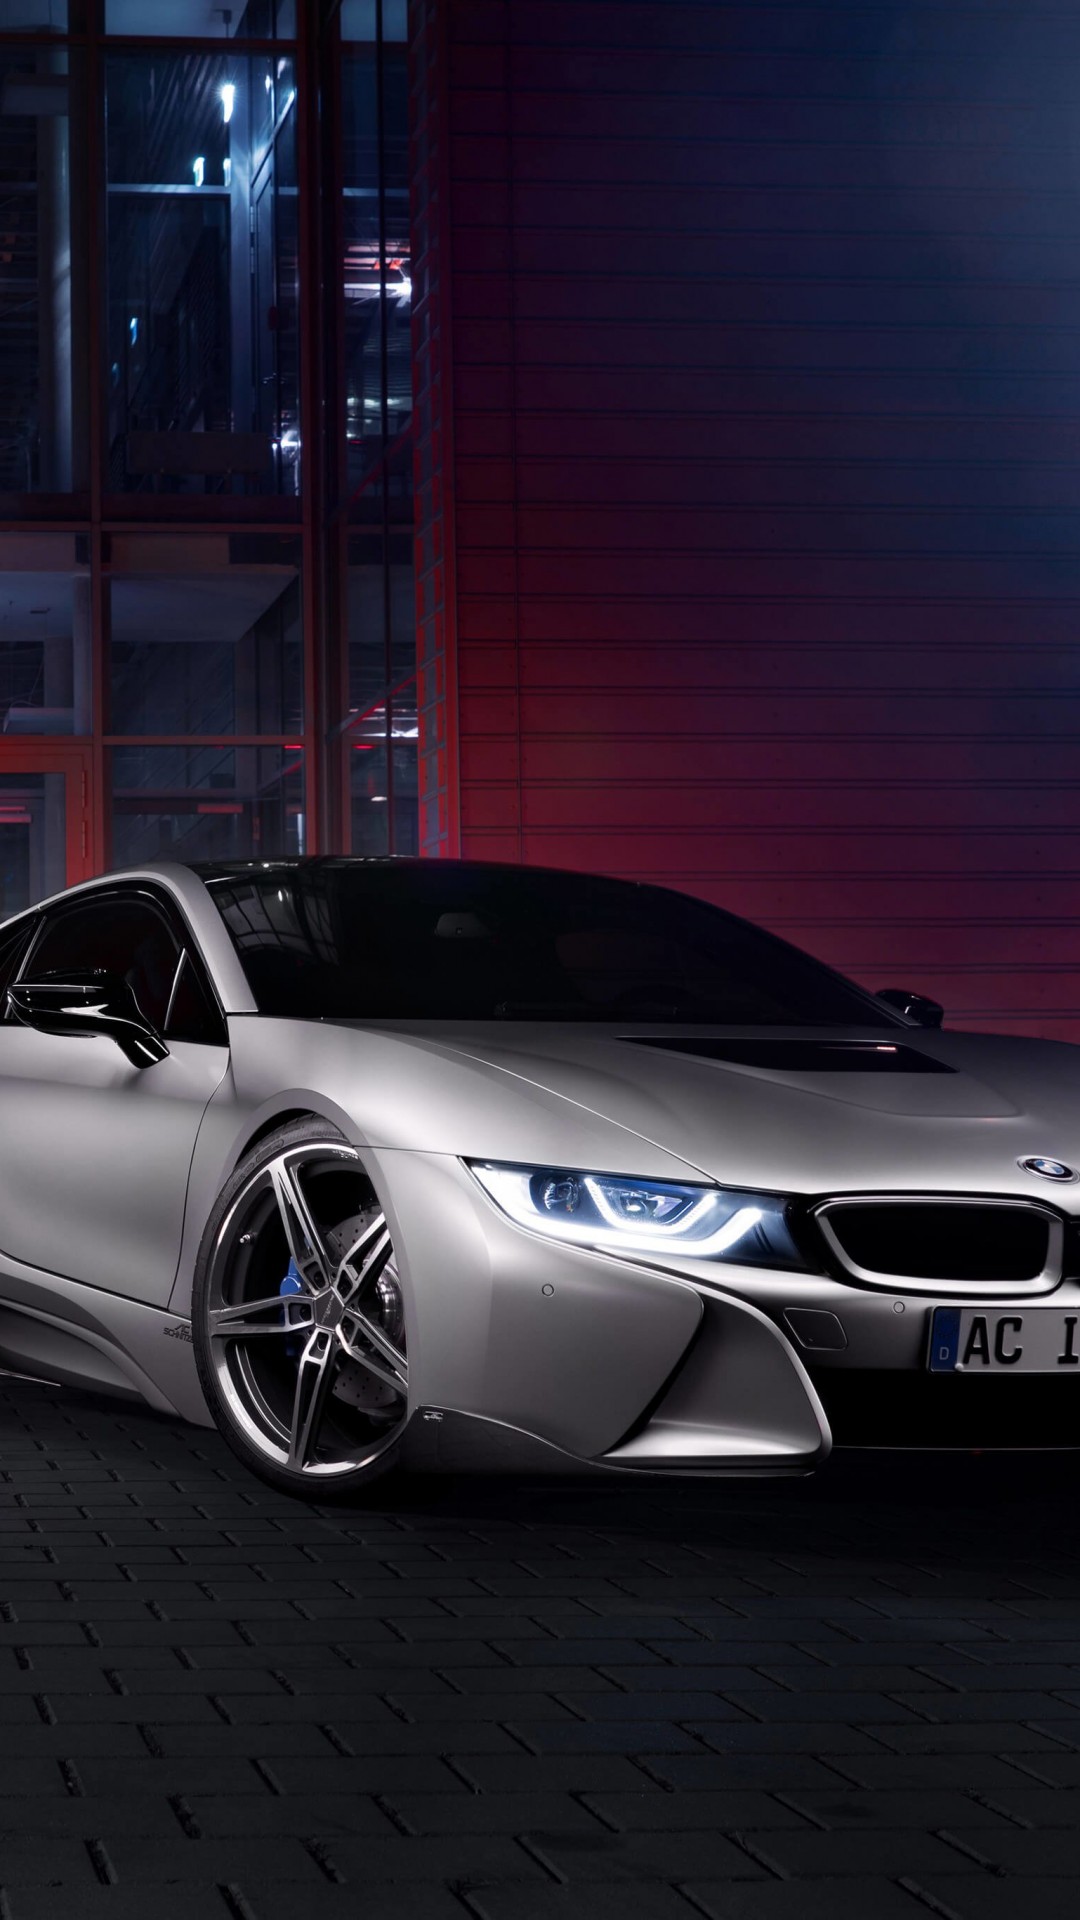 BMW i8 designed by AC Schnitzer Wallpaper for HTC One